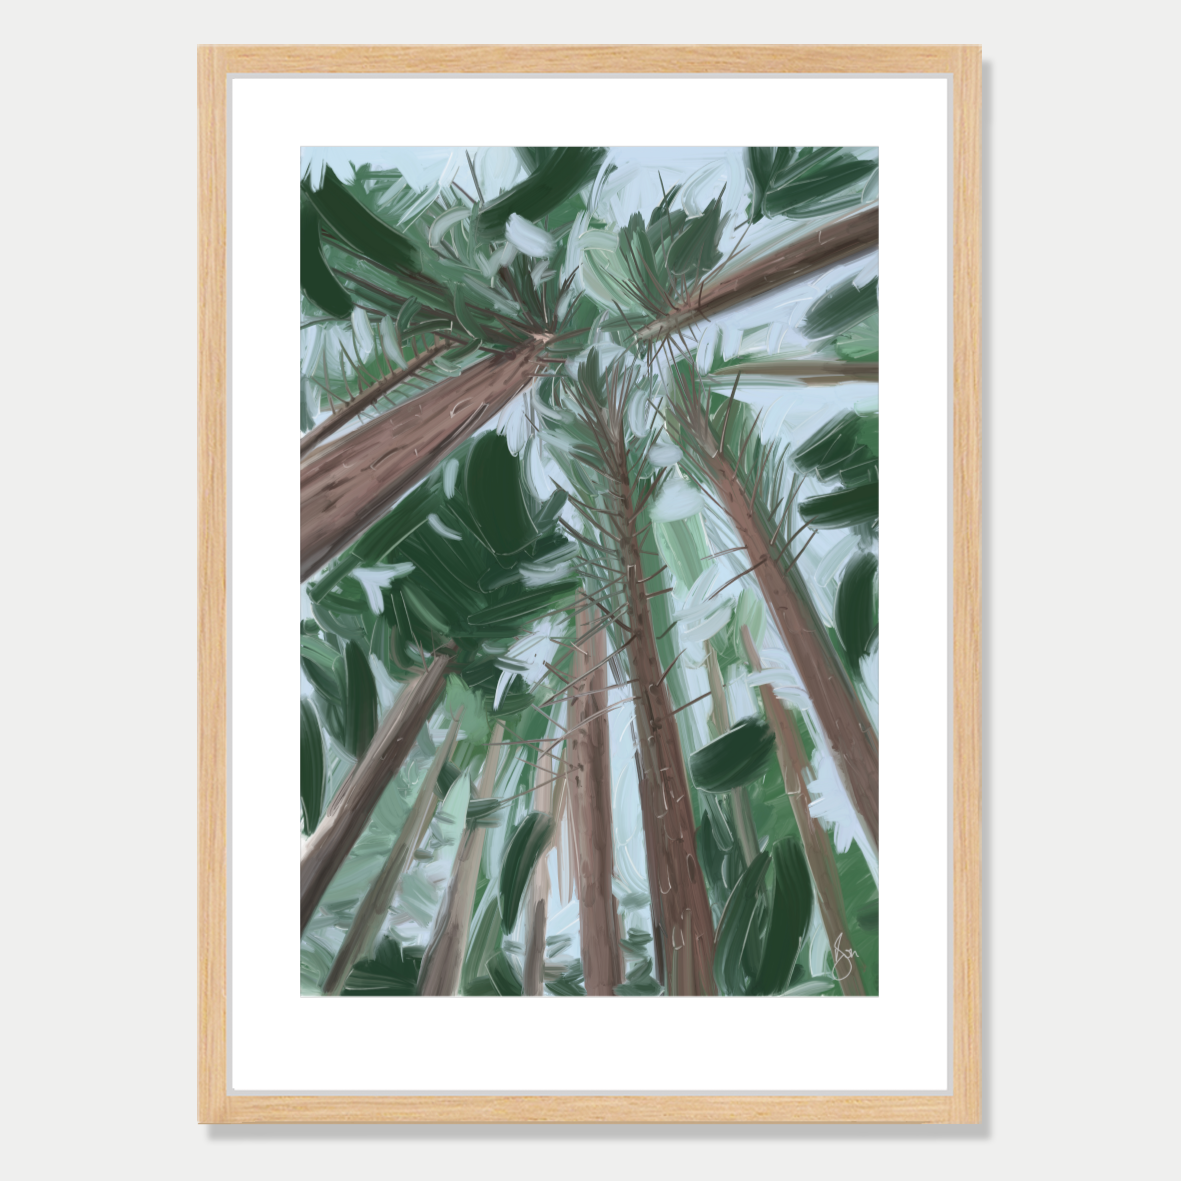 This art print is a still life of a forest scene in New Zealand, by Bon Jung. Printed in New Zealand by endemicworld and framed in raw oak.